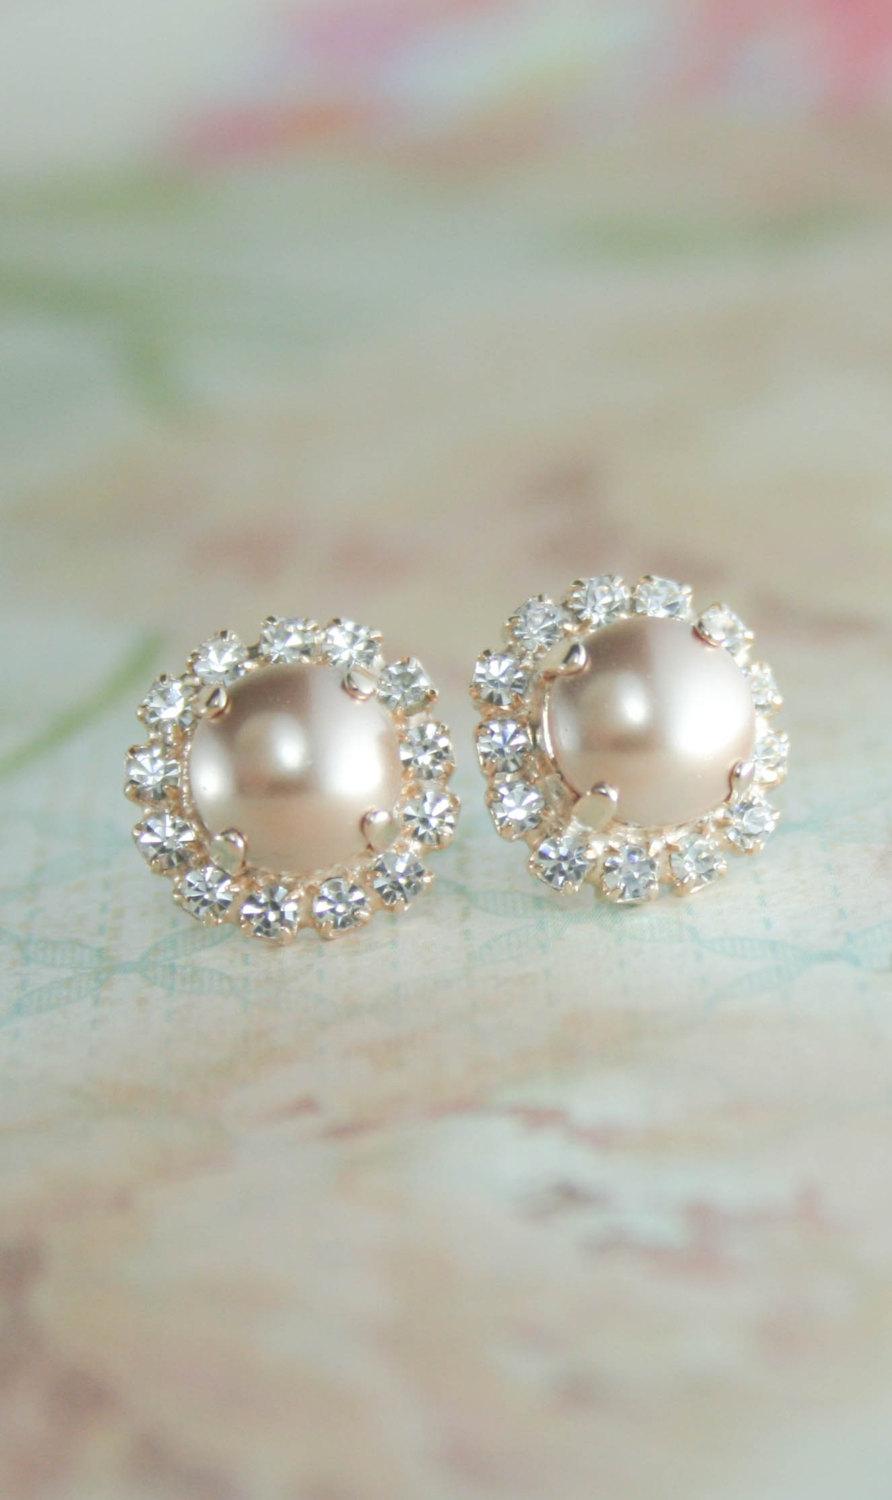 Hochzeit - rose gold pearl earrings,rose gold wedding jewelry,rose gold earrings.rose gold bridal earrings,rose gold stud pearl earrings,pearl earrings